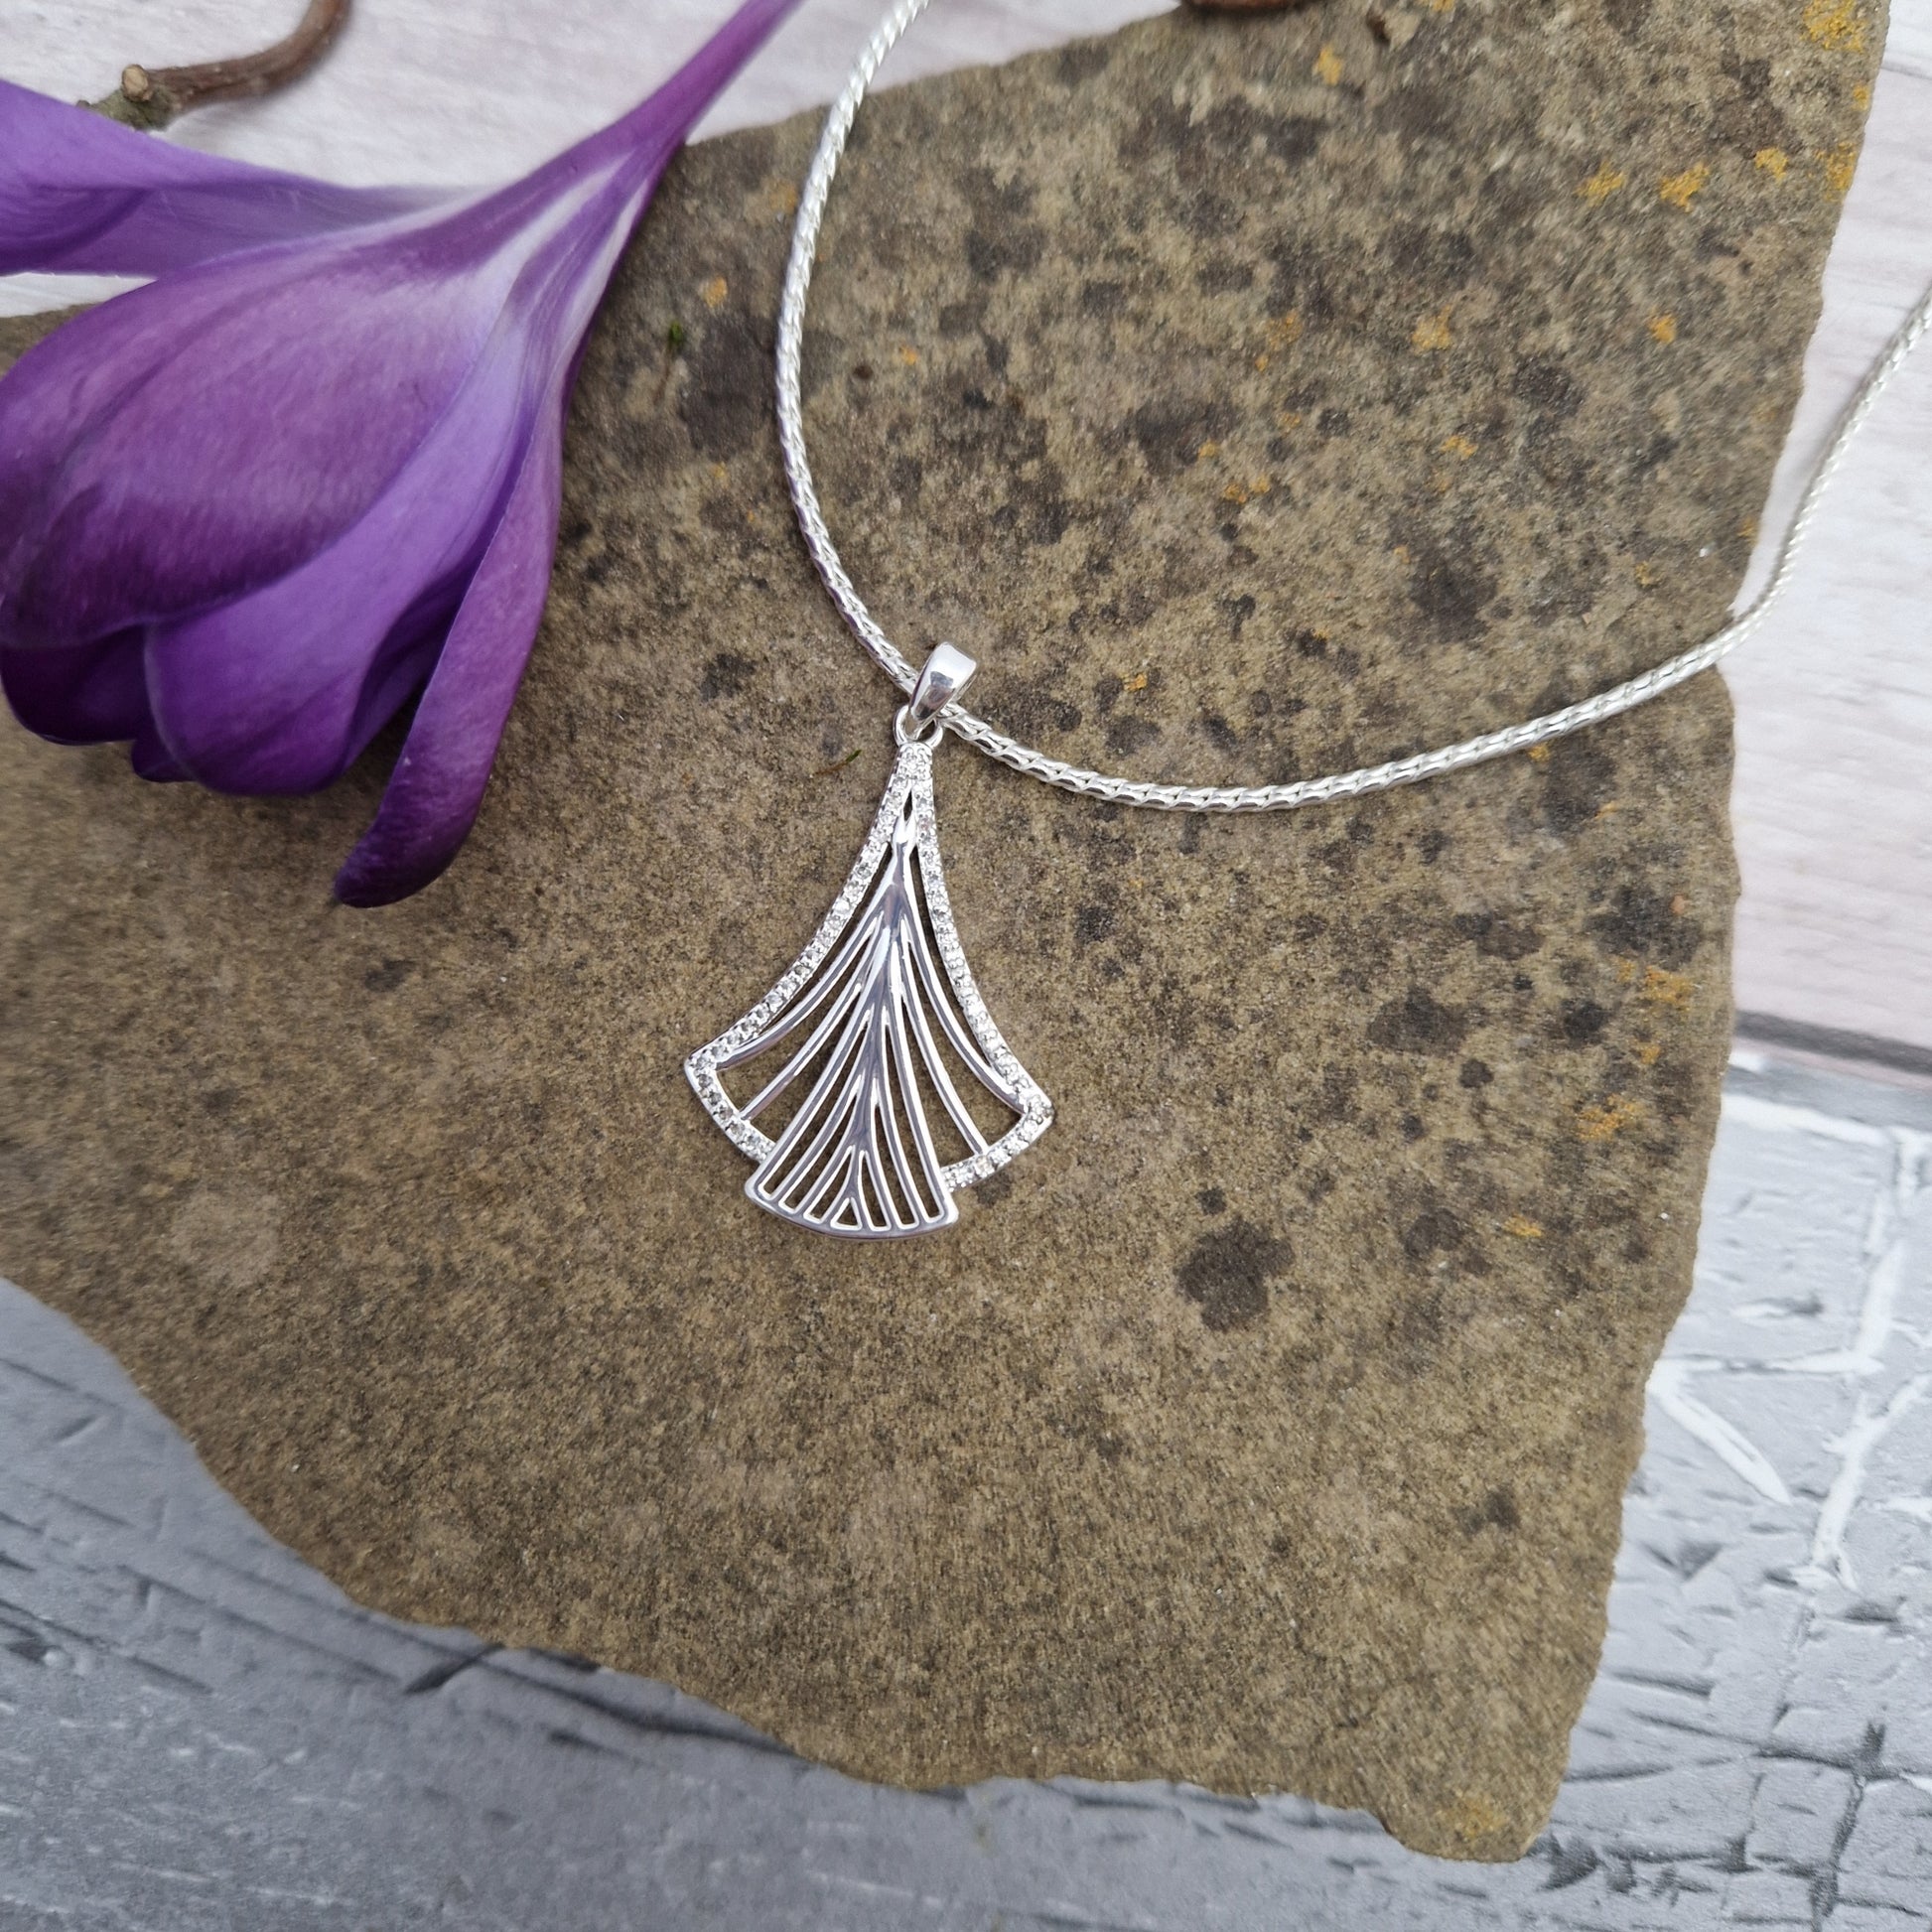 Silver coloured necklace with an Art Deco Fan pendant finished with diamante crystal decoaration.